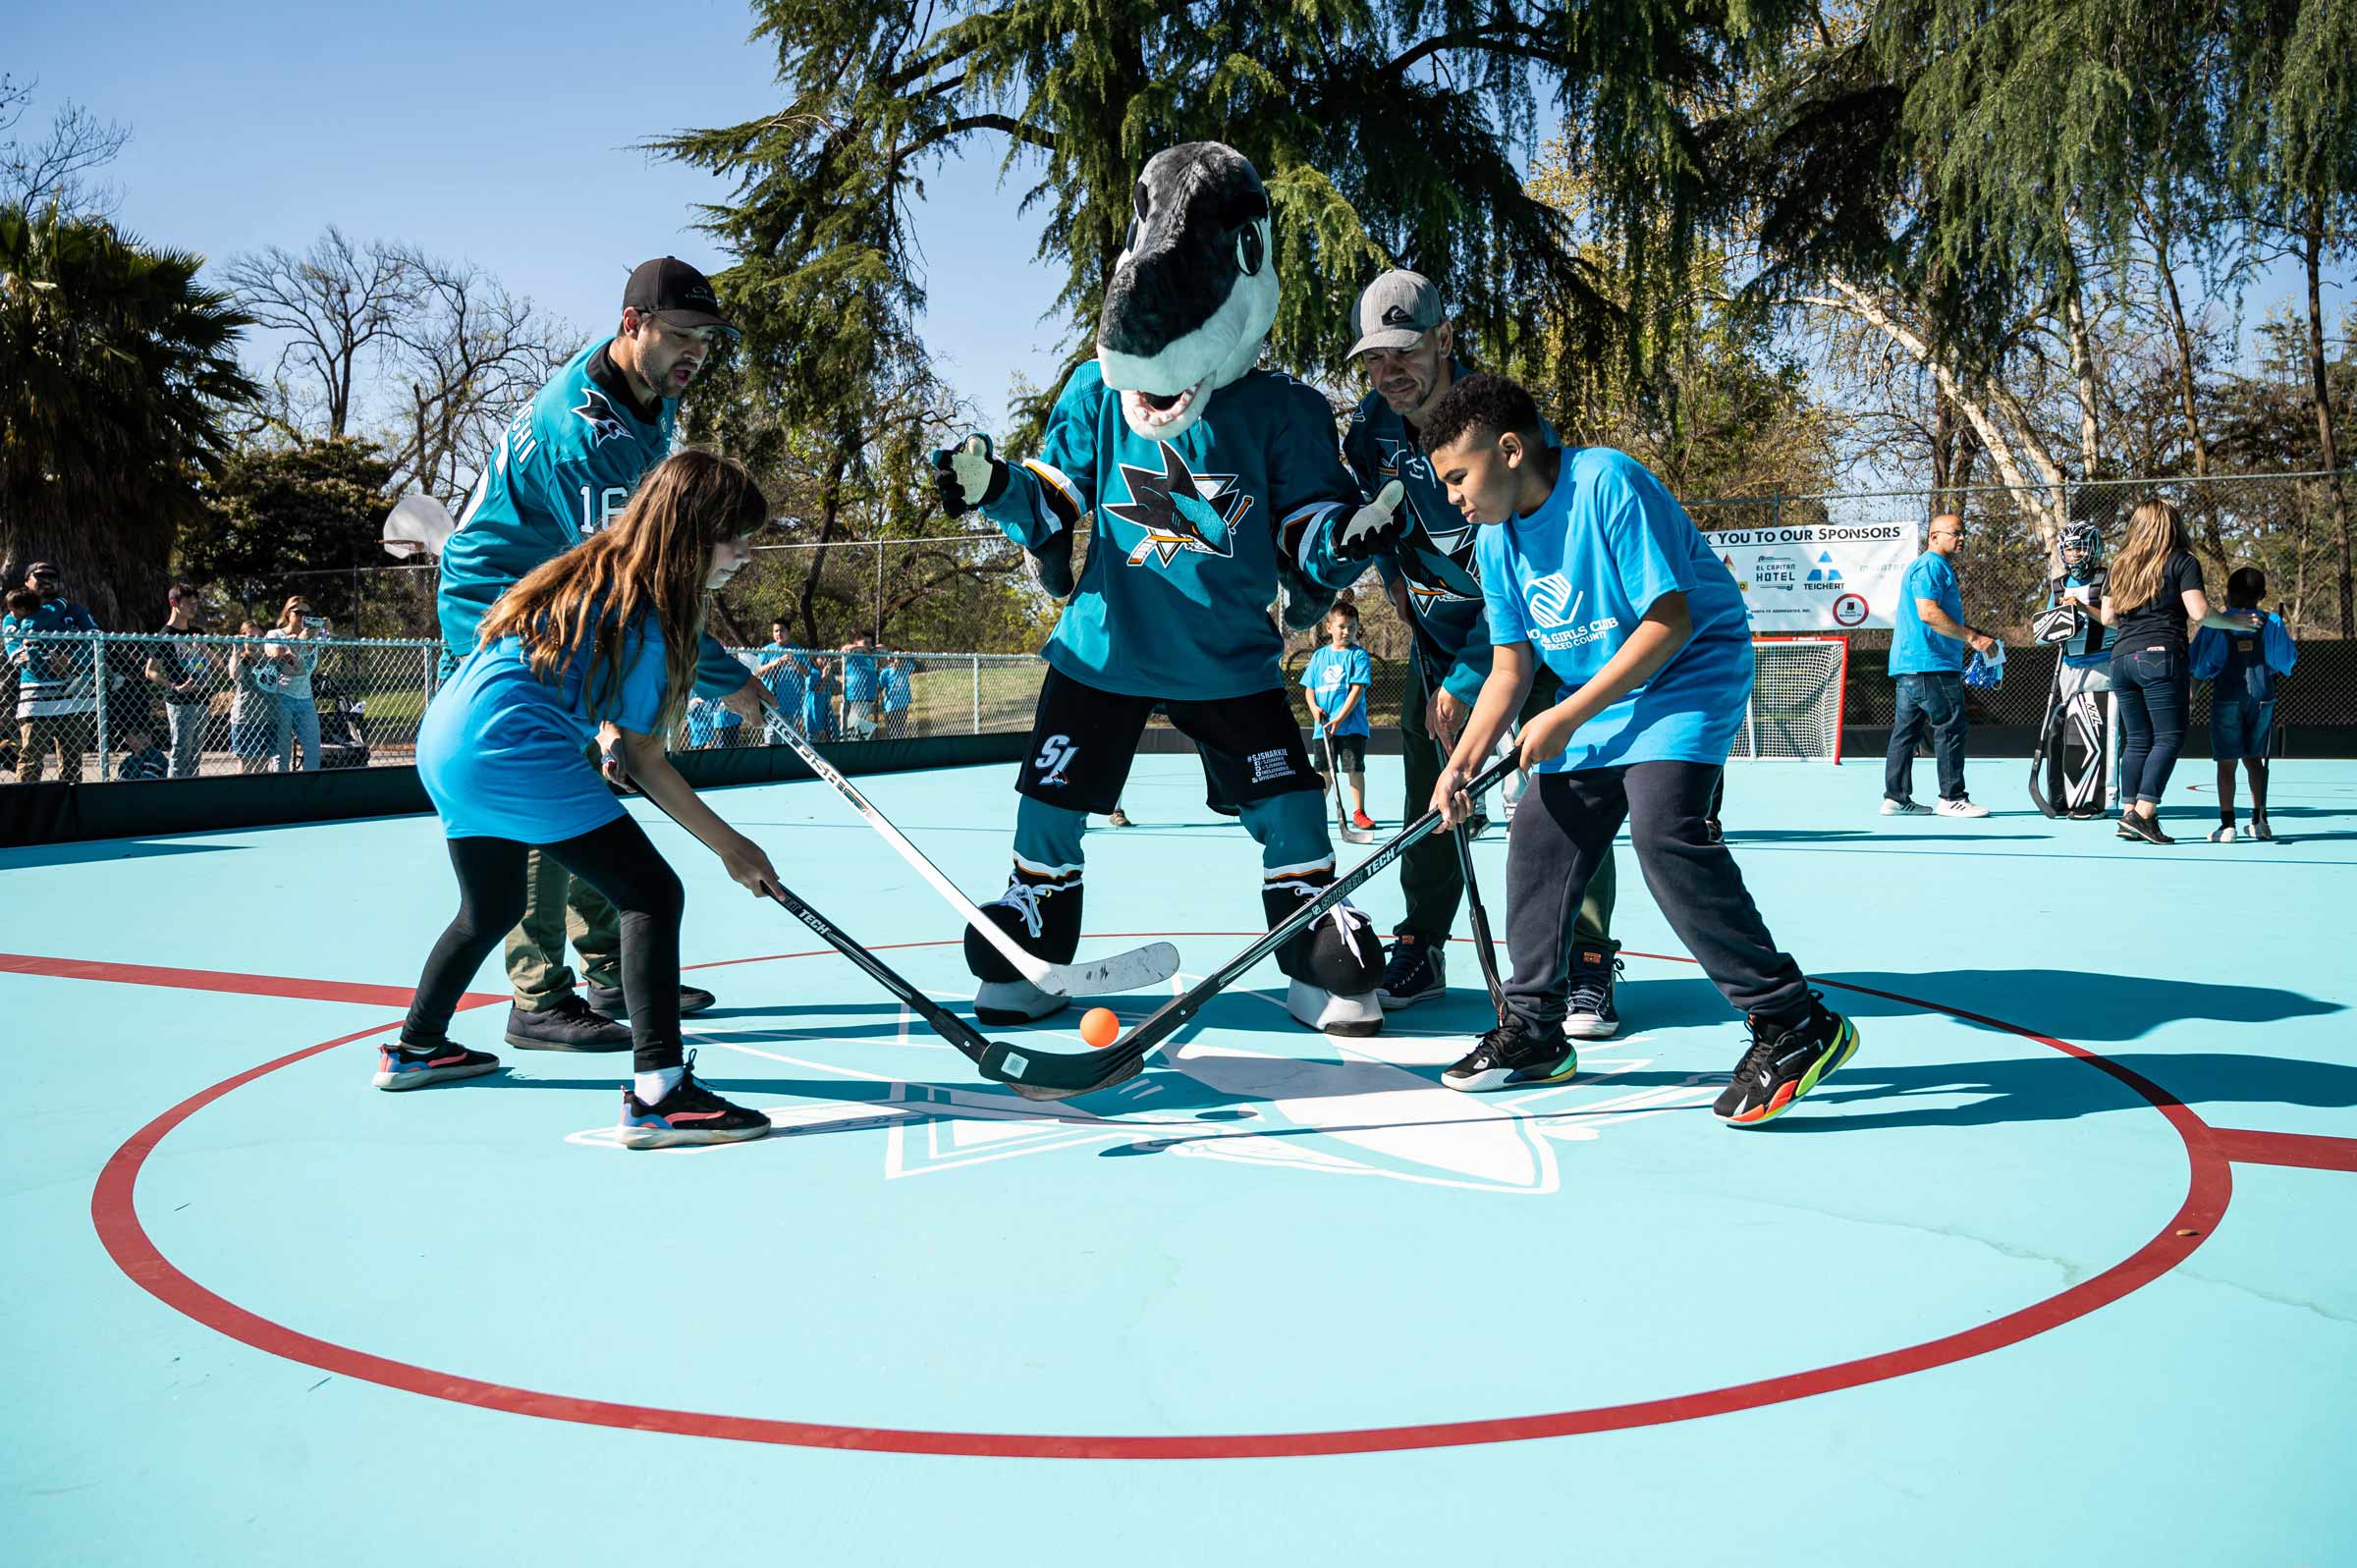 The start of a children's street hockey game with the Sharks mascot acting as referee